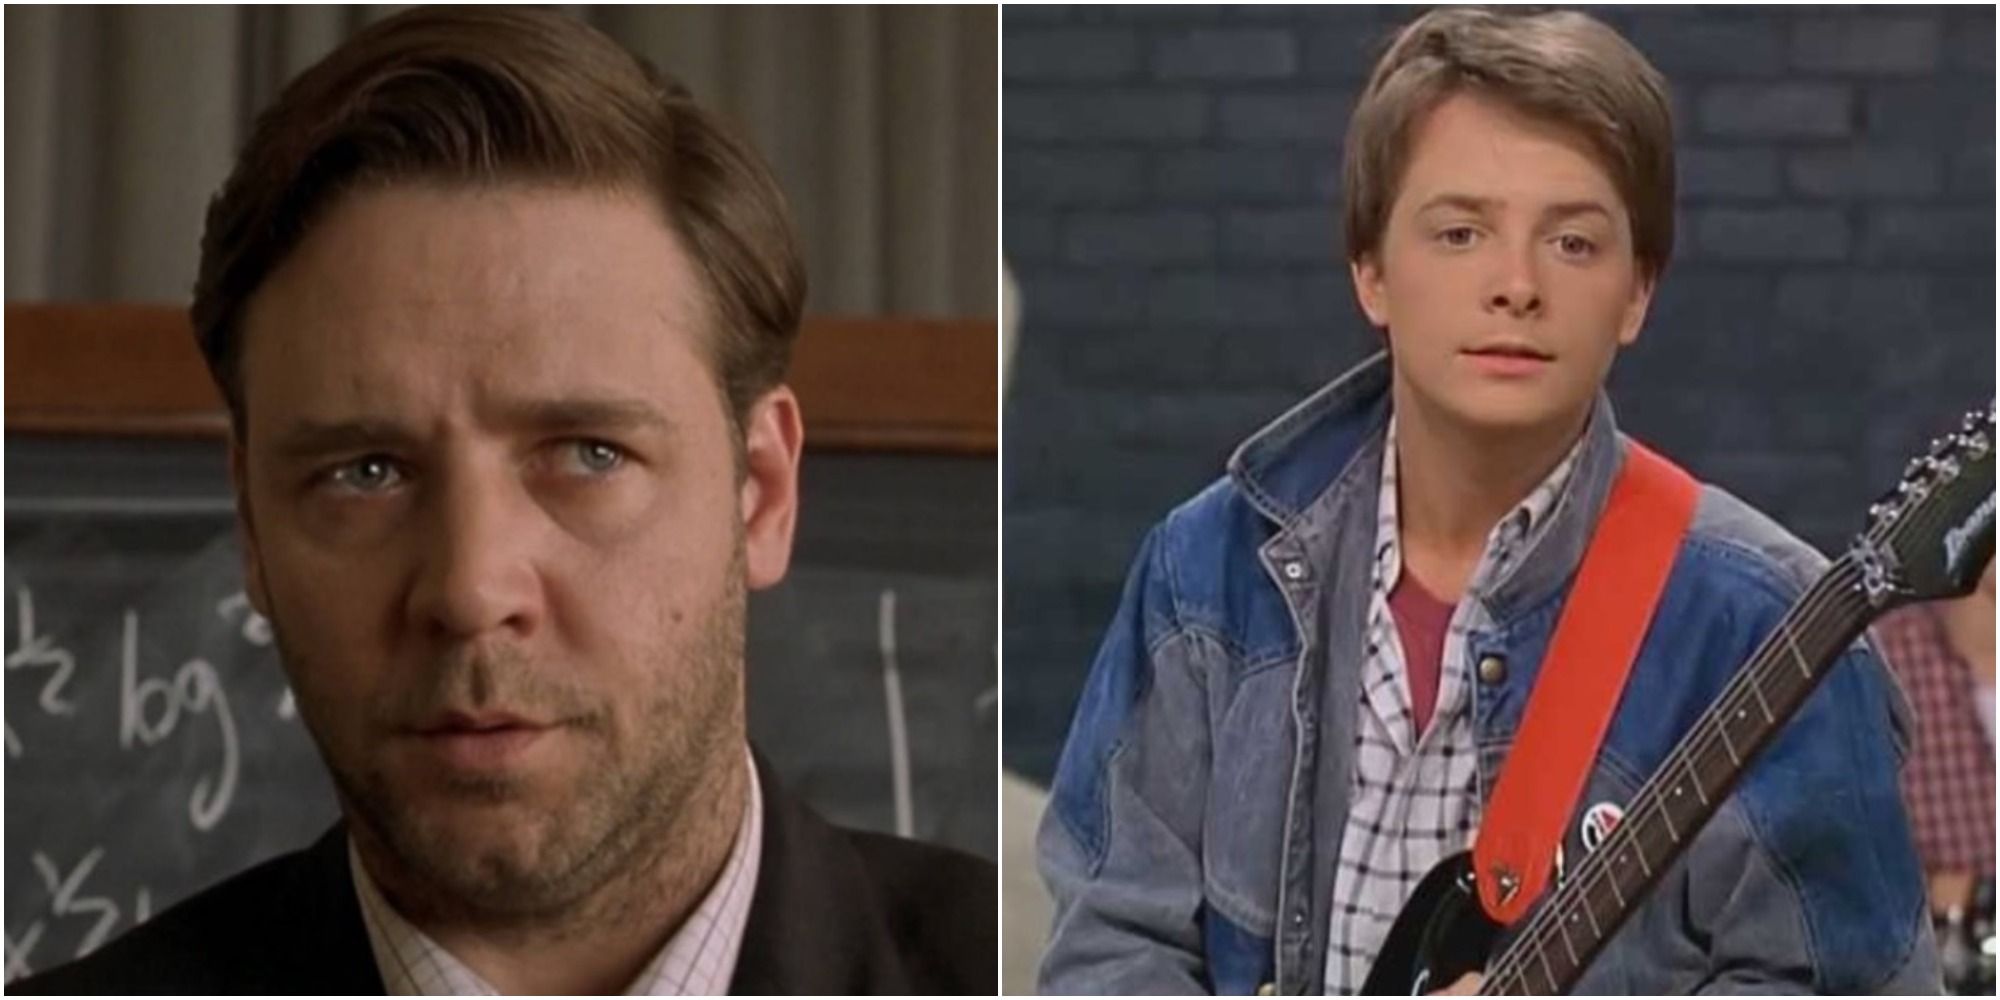 Split Image showing stills from A Beautiful Mind and BTTF